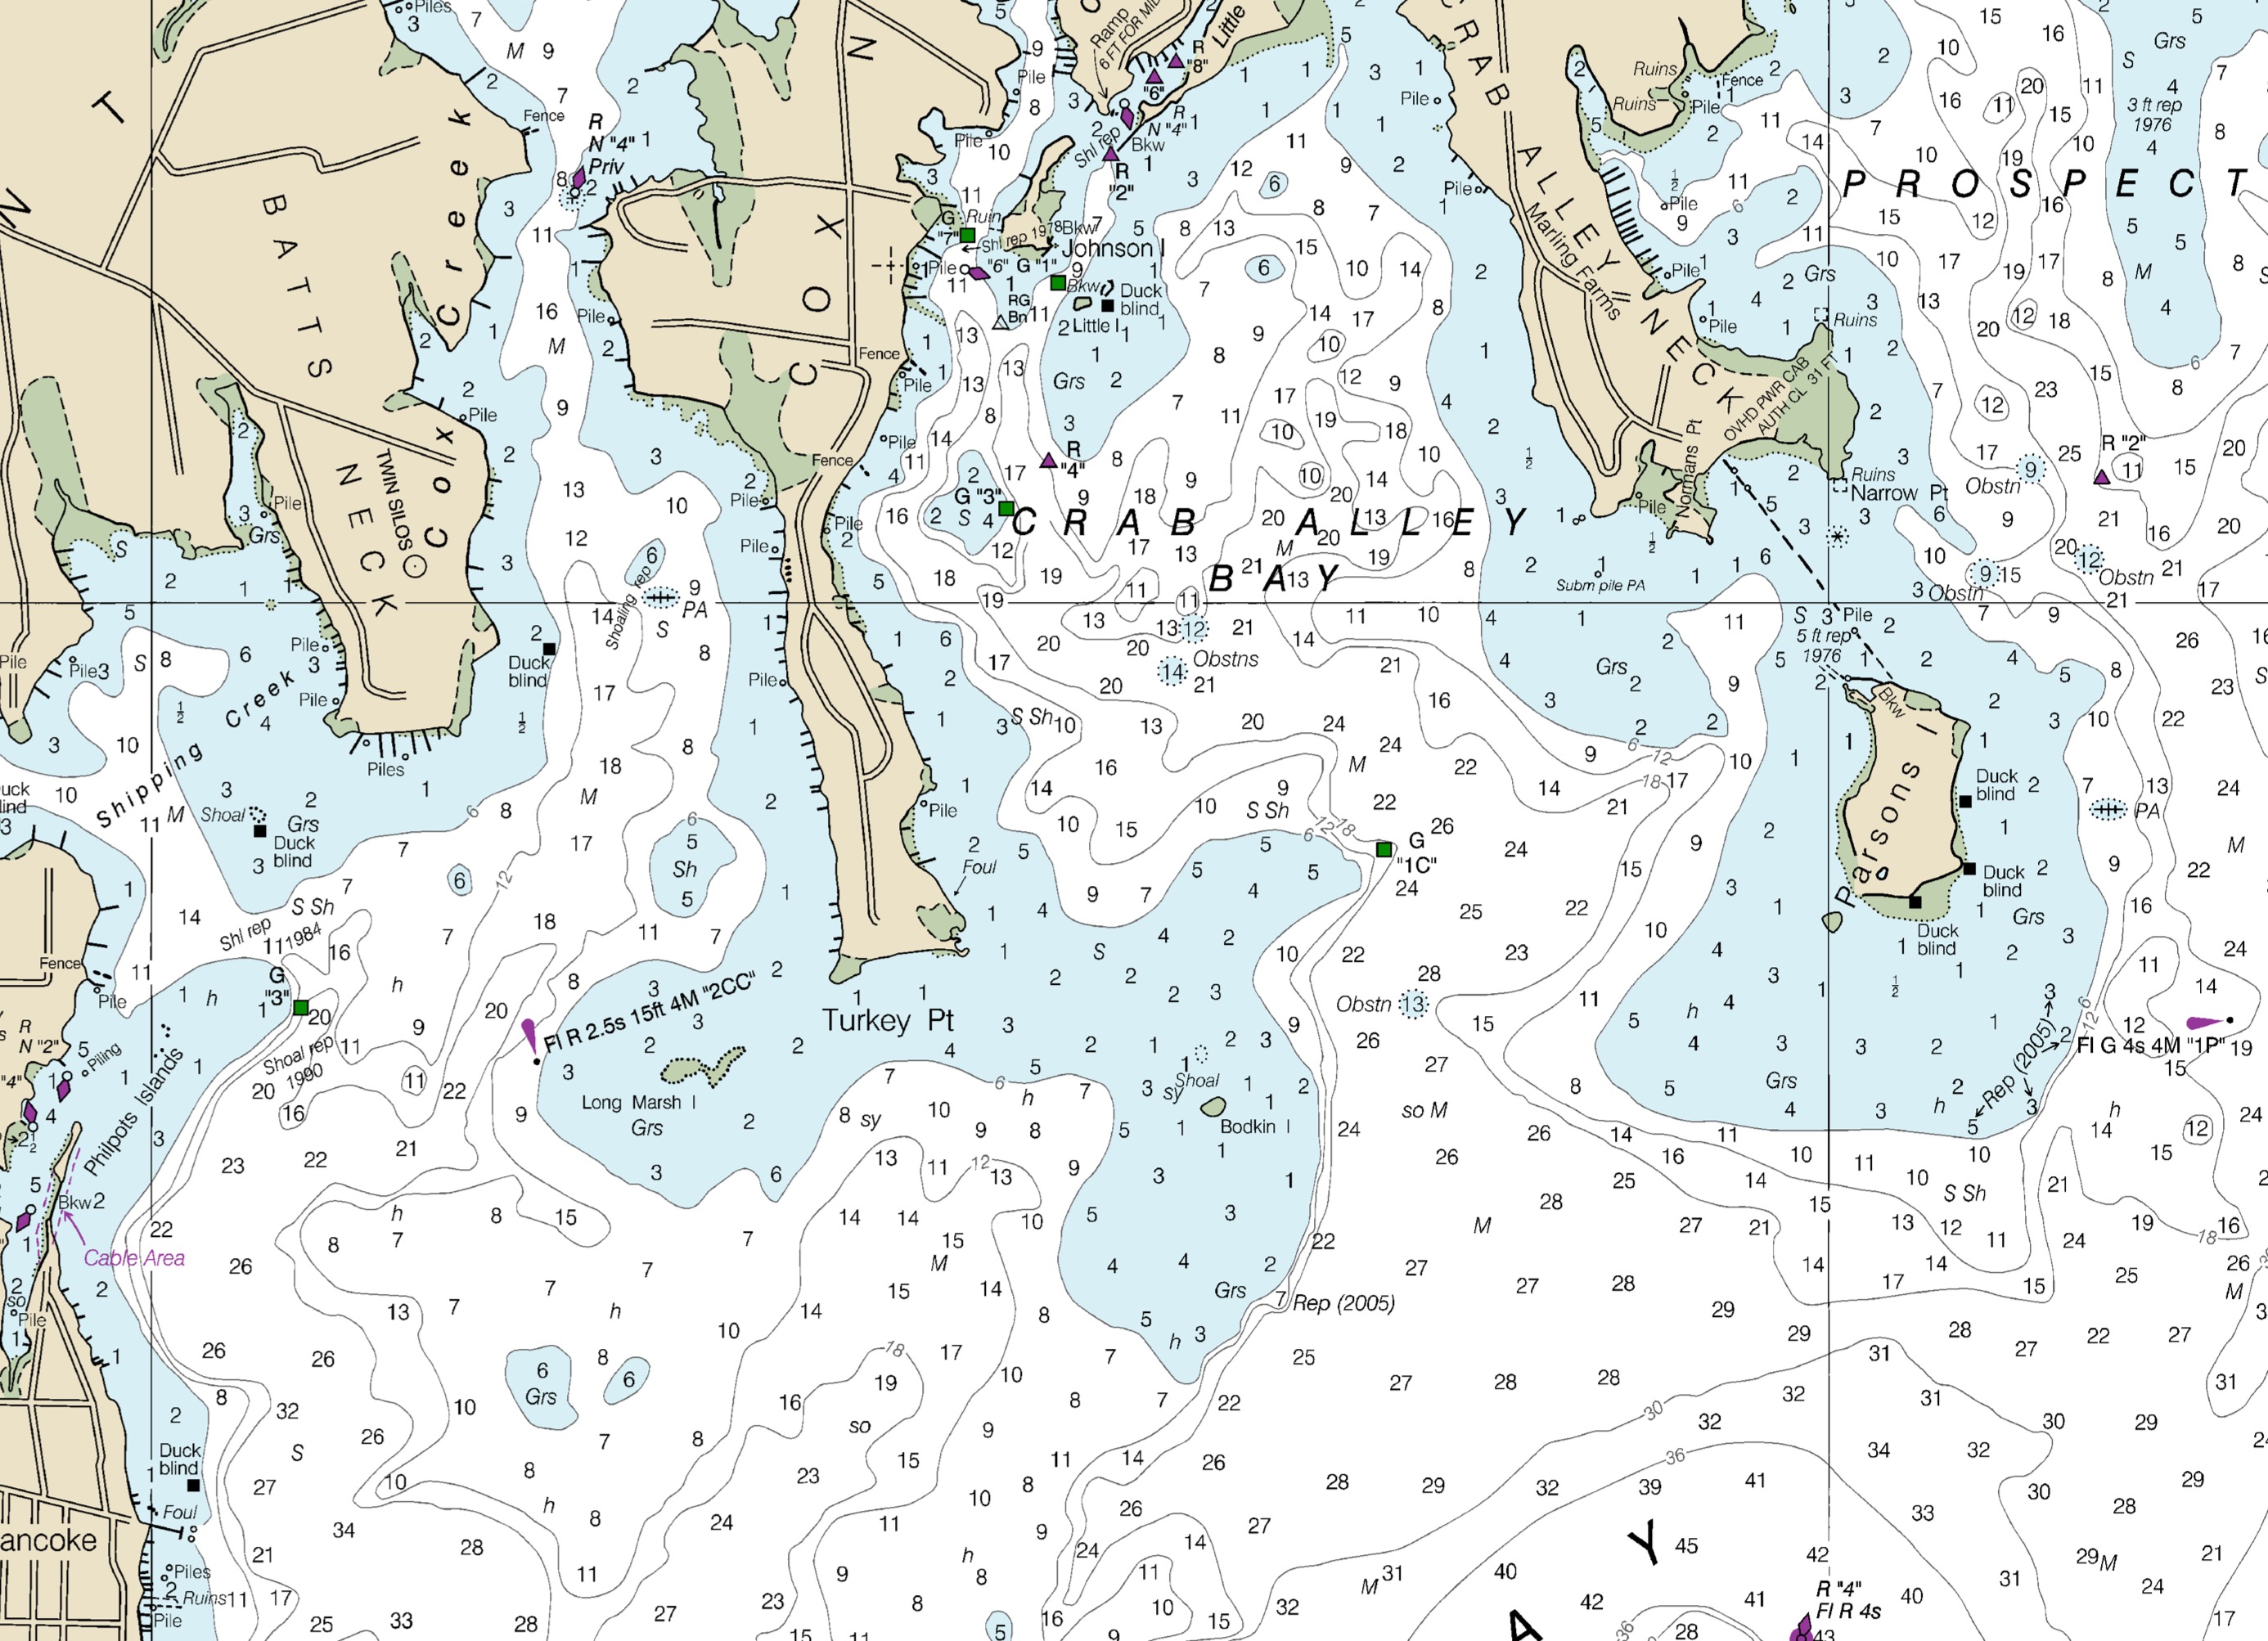 older nautical chart showing a larger island